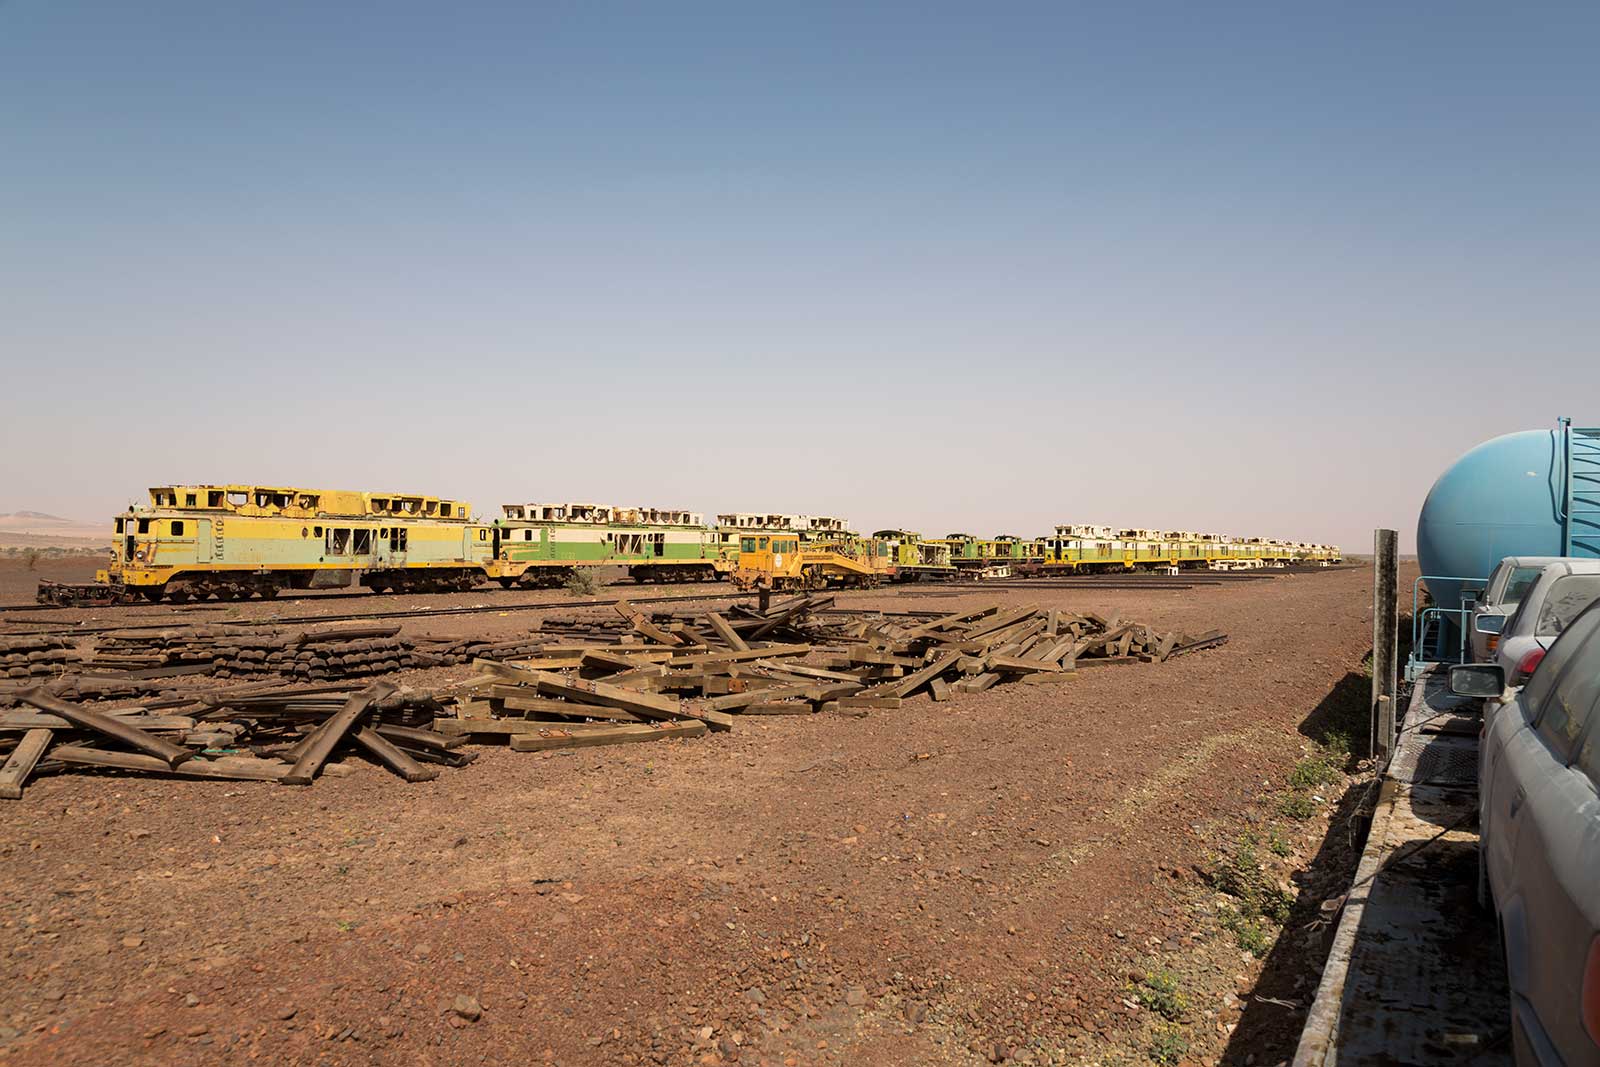 While the Iron Ore Train snakes its way through Mauritania, you'll come across wrecks from all sorts of vehicles - here, old Diesel locomotives that were once in use have been parked.